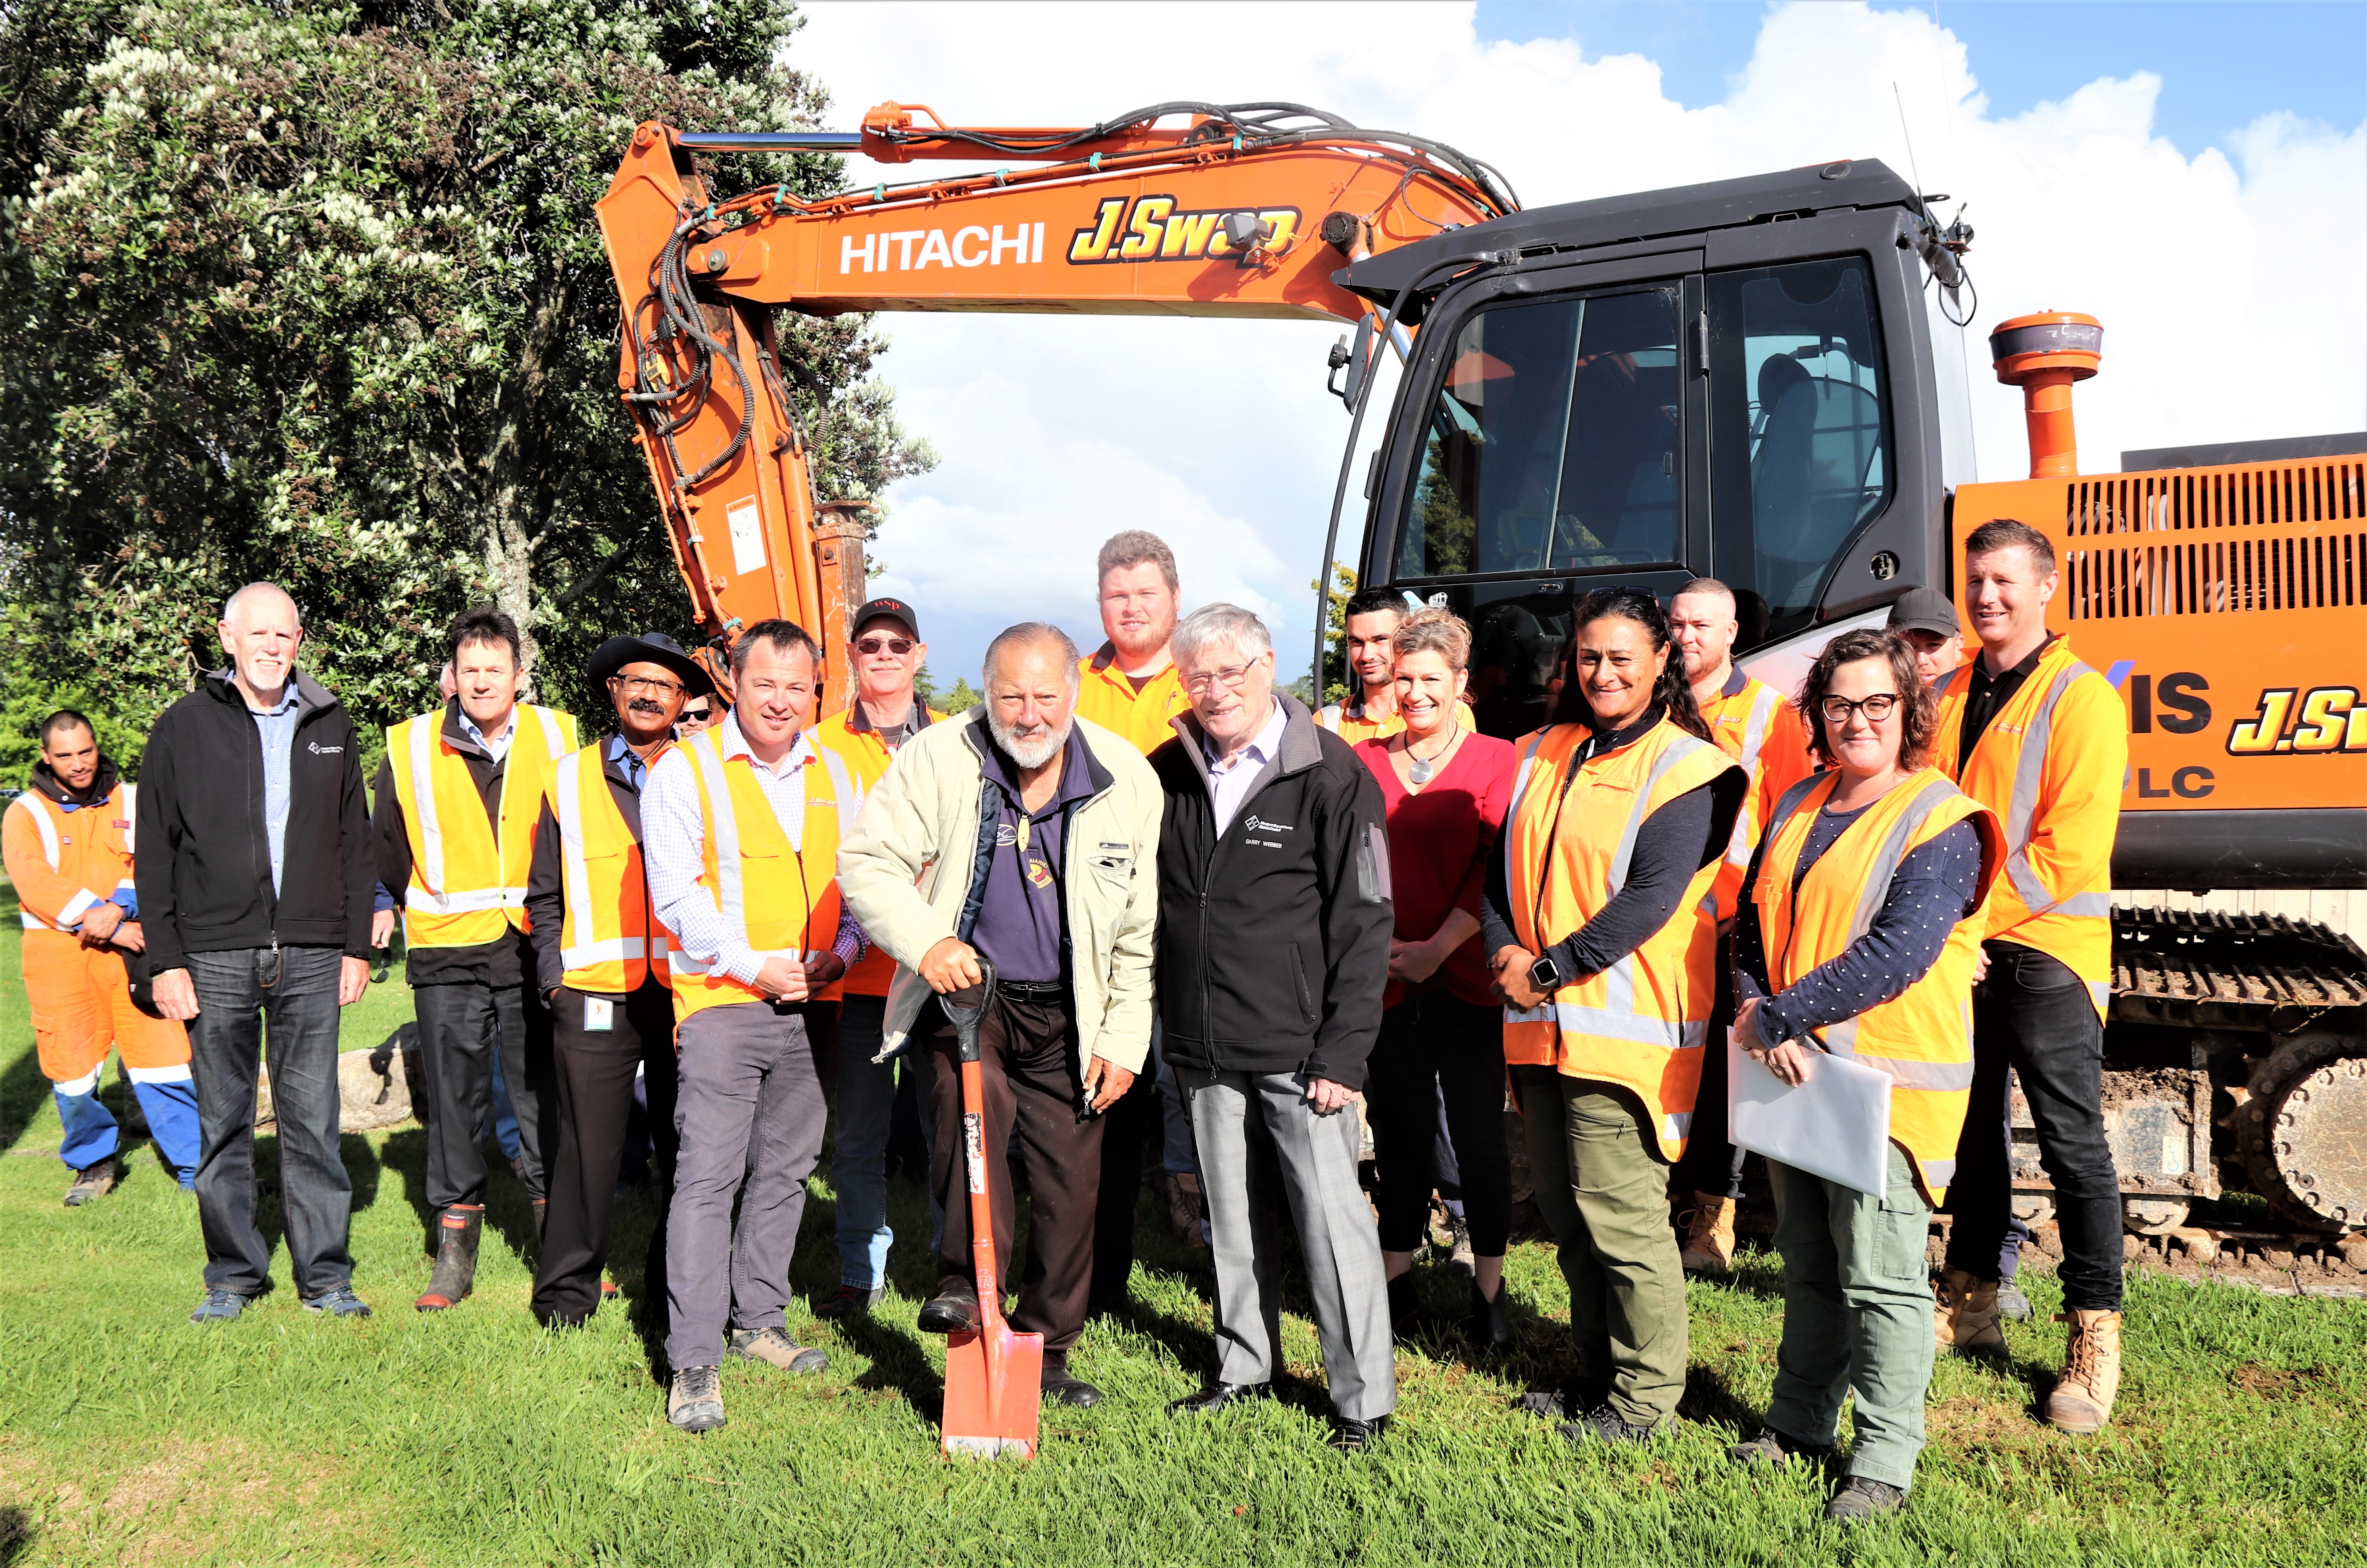 Omokoroa Road urbanisation project started today with a site blessing by Pirirakau hapū kaumatua Tame Kuku centre left and Mayor Garry Webber turning the first sod, along with J Swap Contract Manager Shanan Mowatt (left by Tame Kuka) and the Swap construction crew, Western Bay councillors and staff and project consultants.